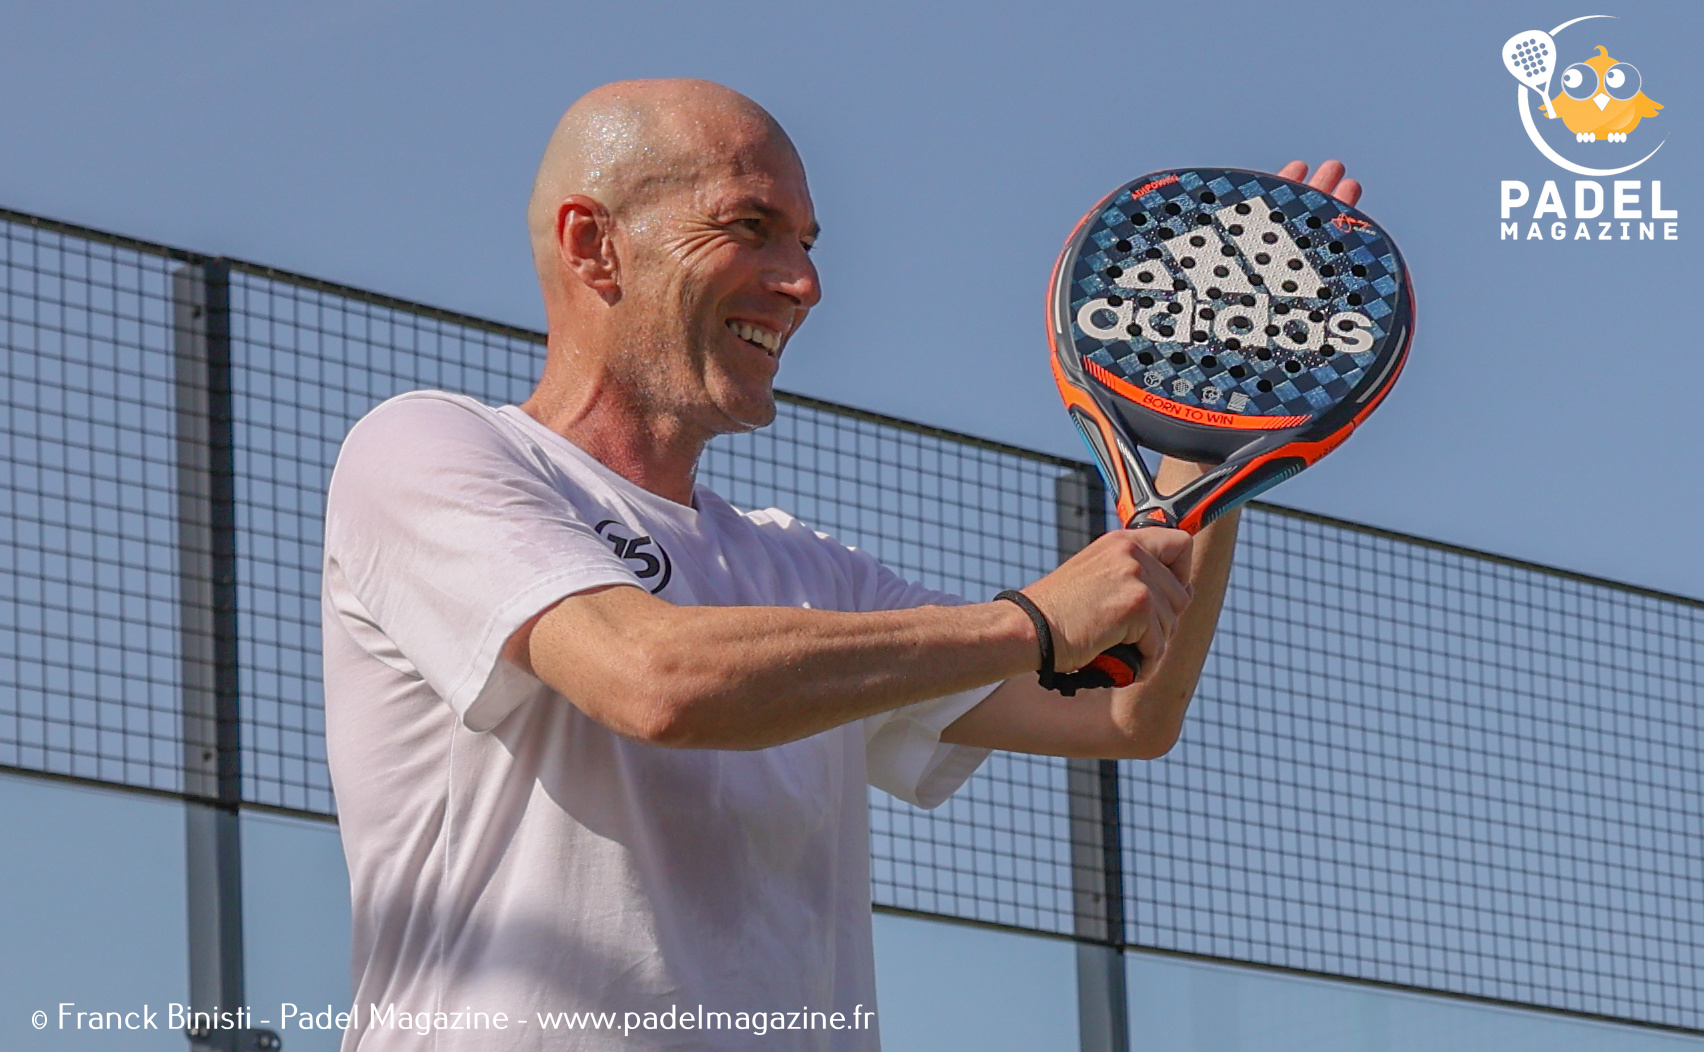 Zinedine Zidane: “At the padel we can play with everyone”